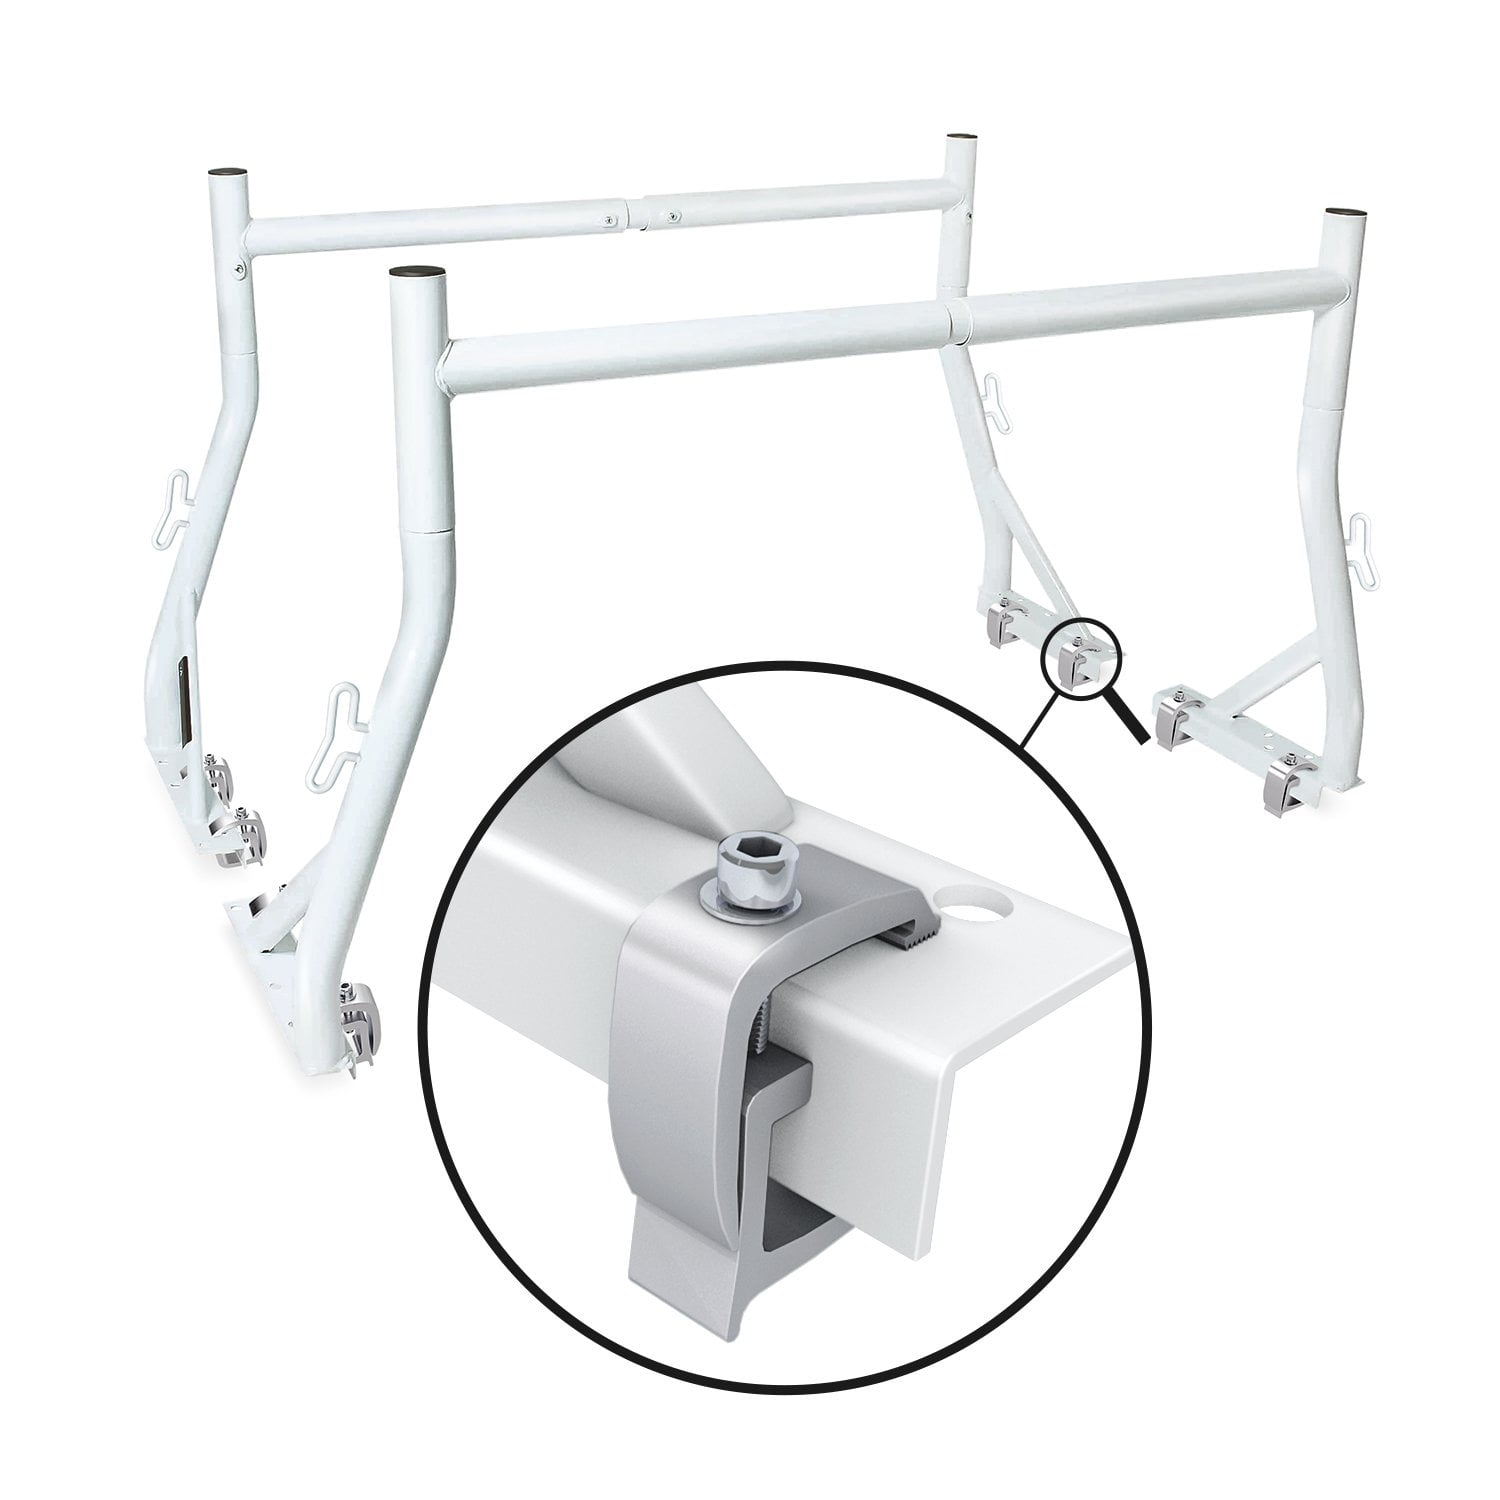 AA-Racks X35 Truck Rack with 8 Non-Drilling C-Clamps Pick-up Truck Utility Ladder Rack Matte White AA Products Inc 